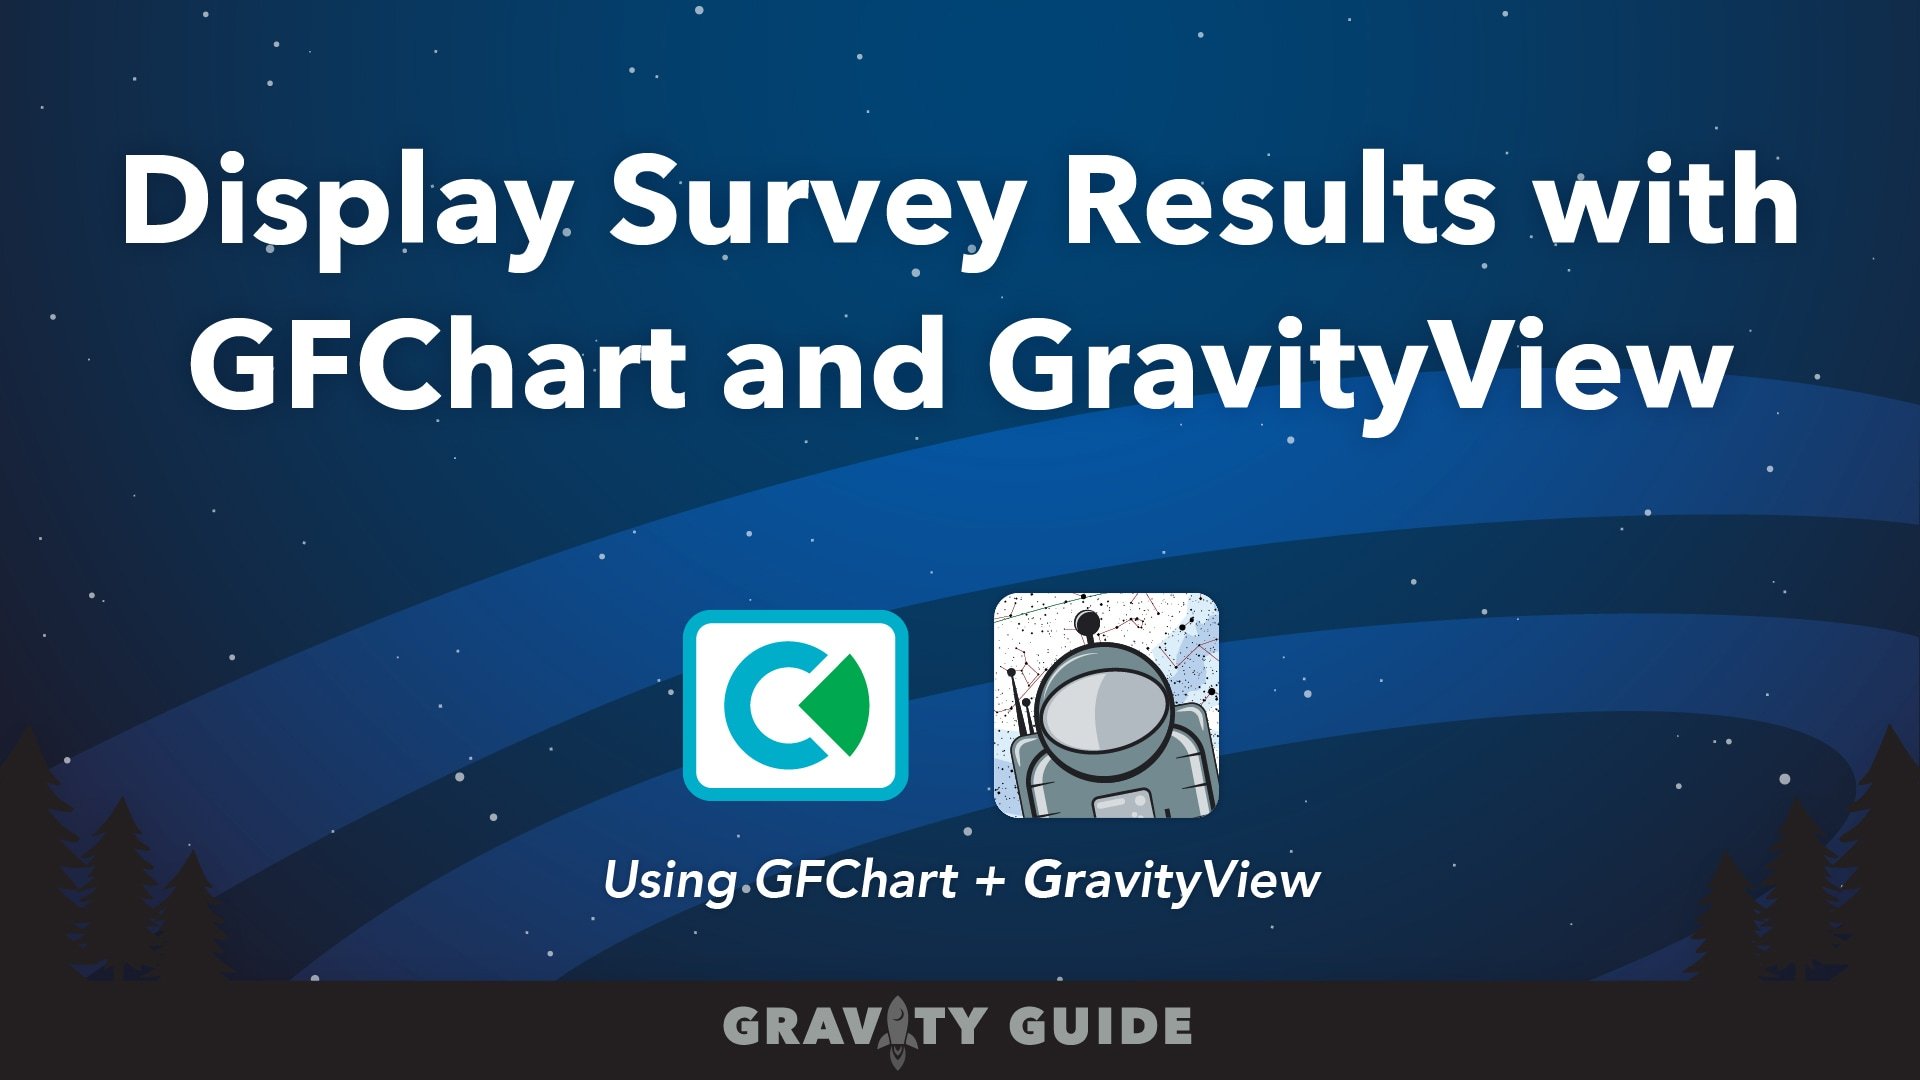 Display Survey Results with GFChart and GravityView